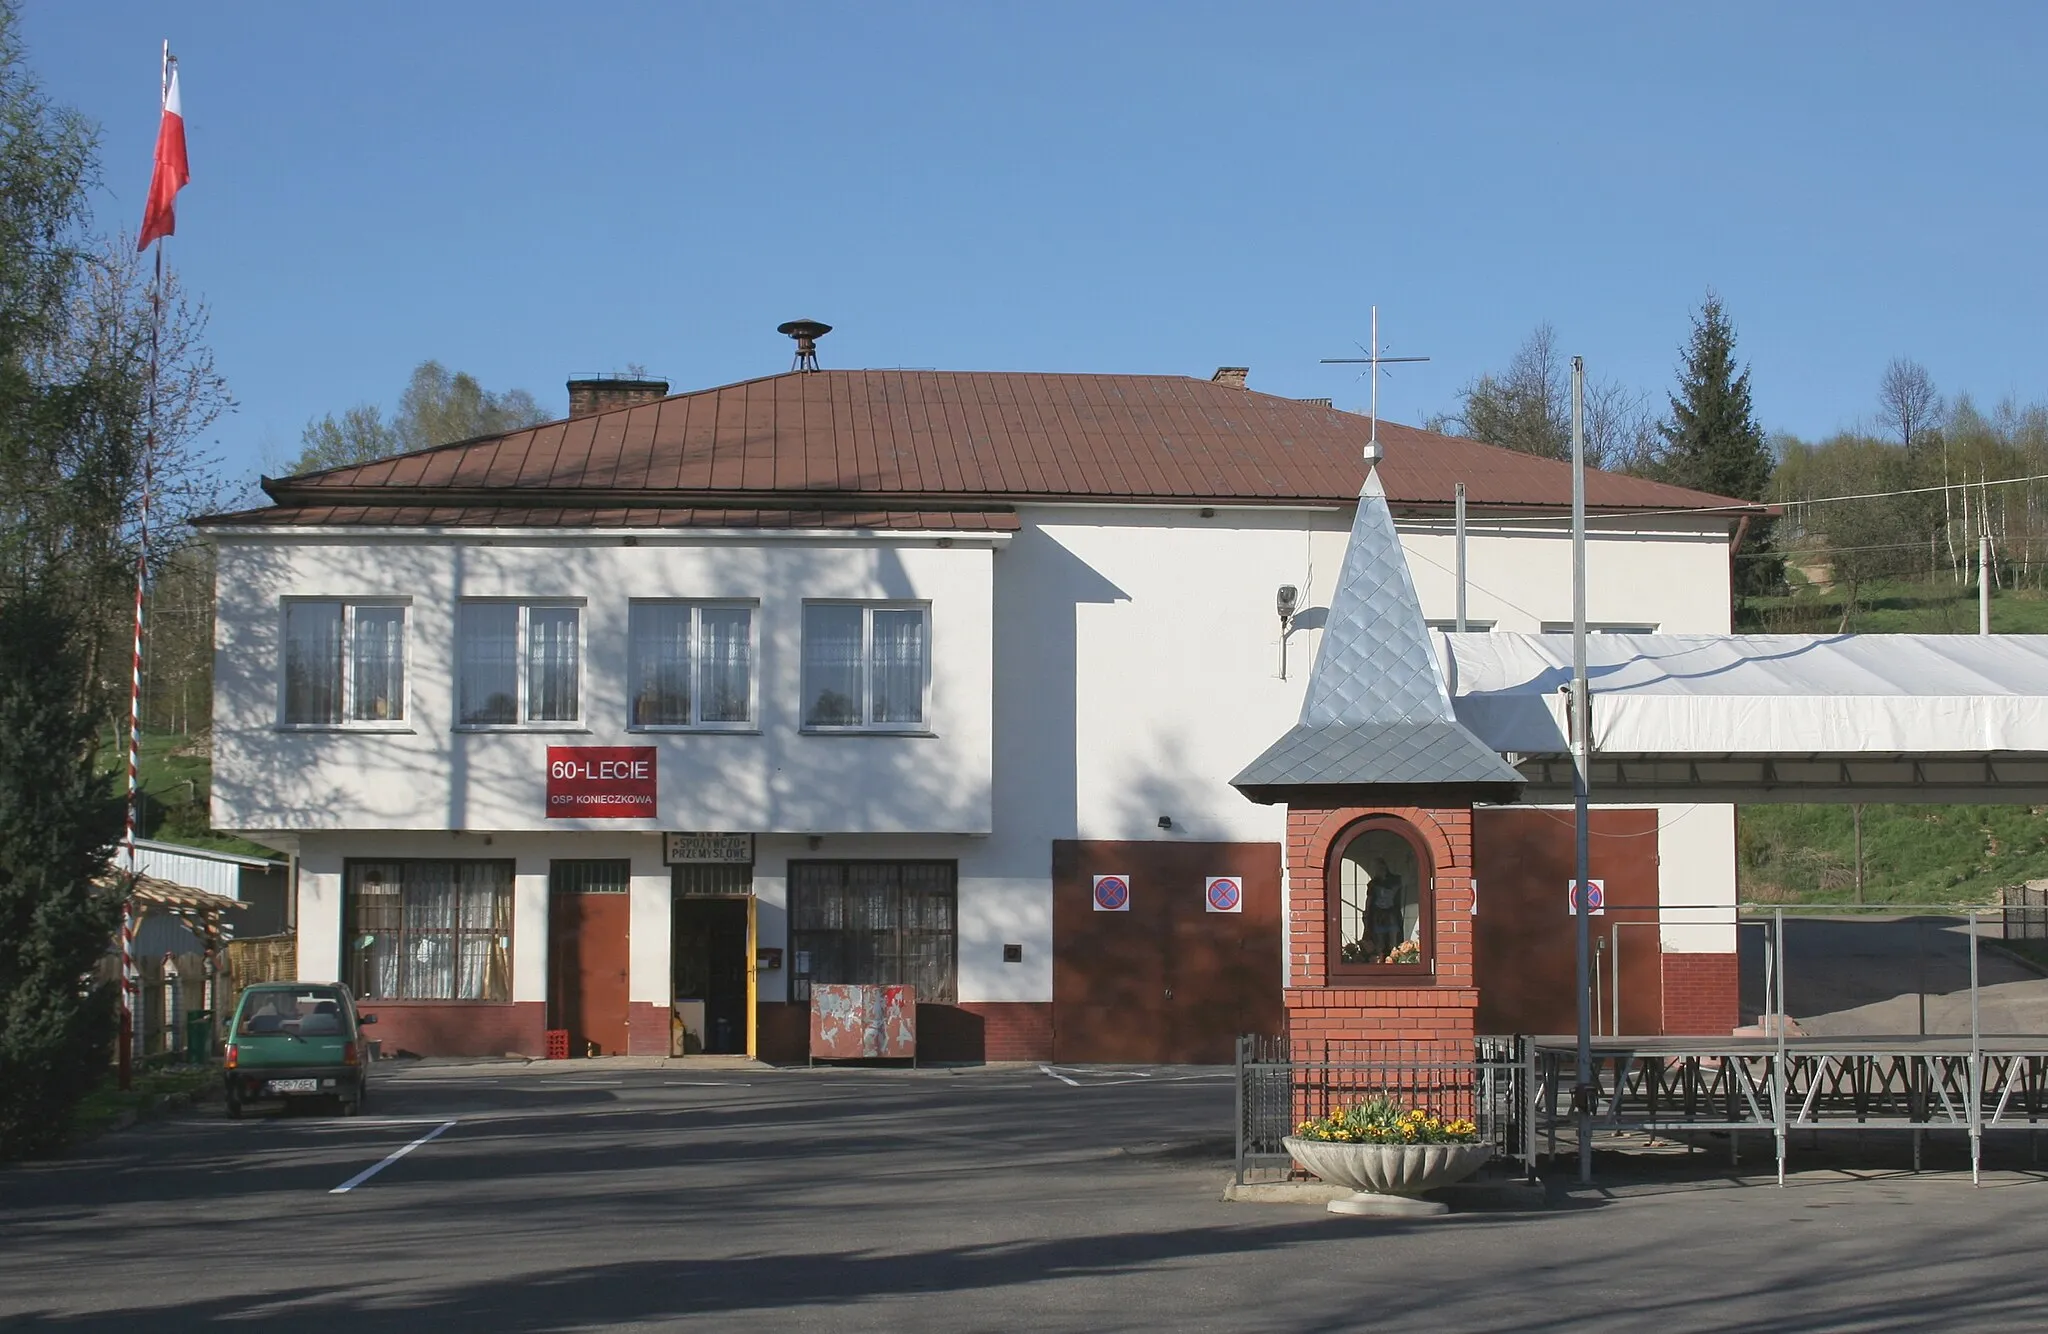 Photo showing: The Fire department in Konieczkowa, Poland.